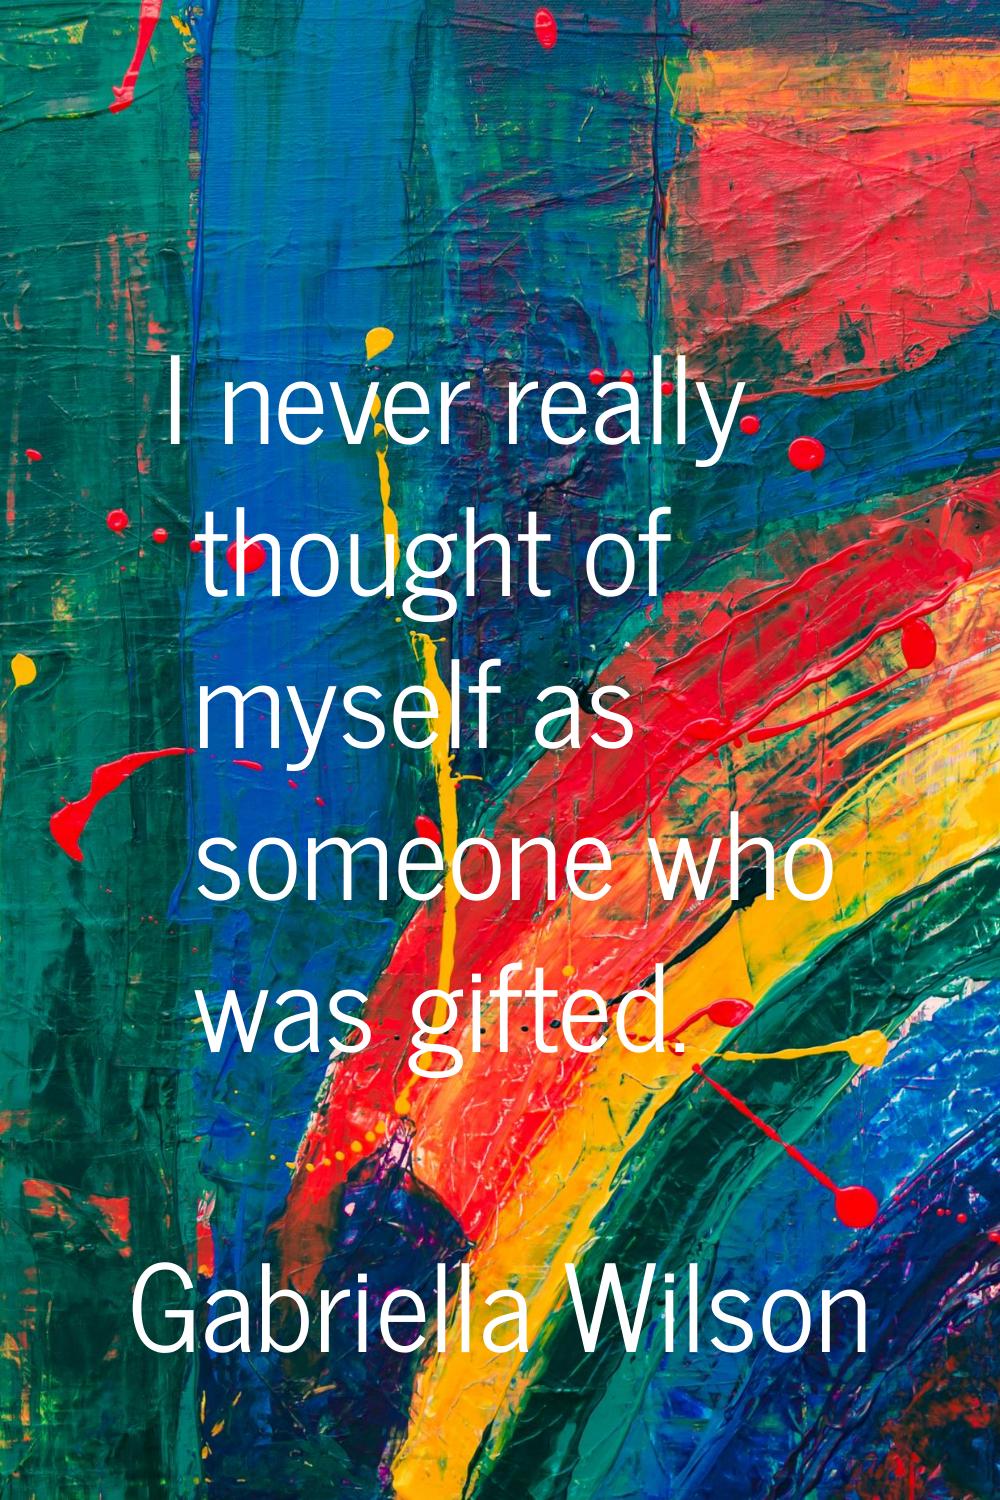 I never really thought of myself as someone who was gifted.